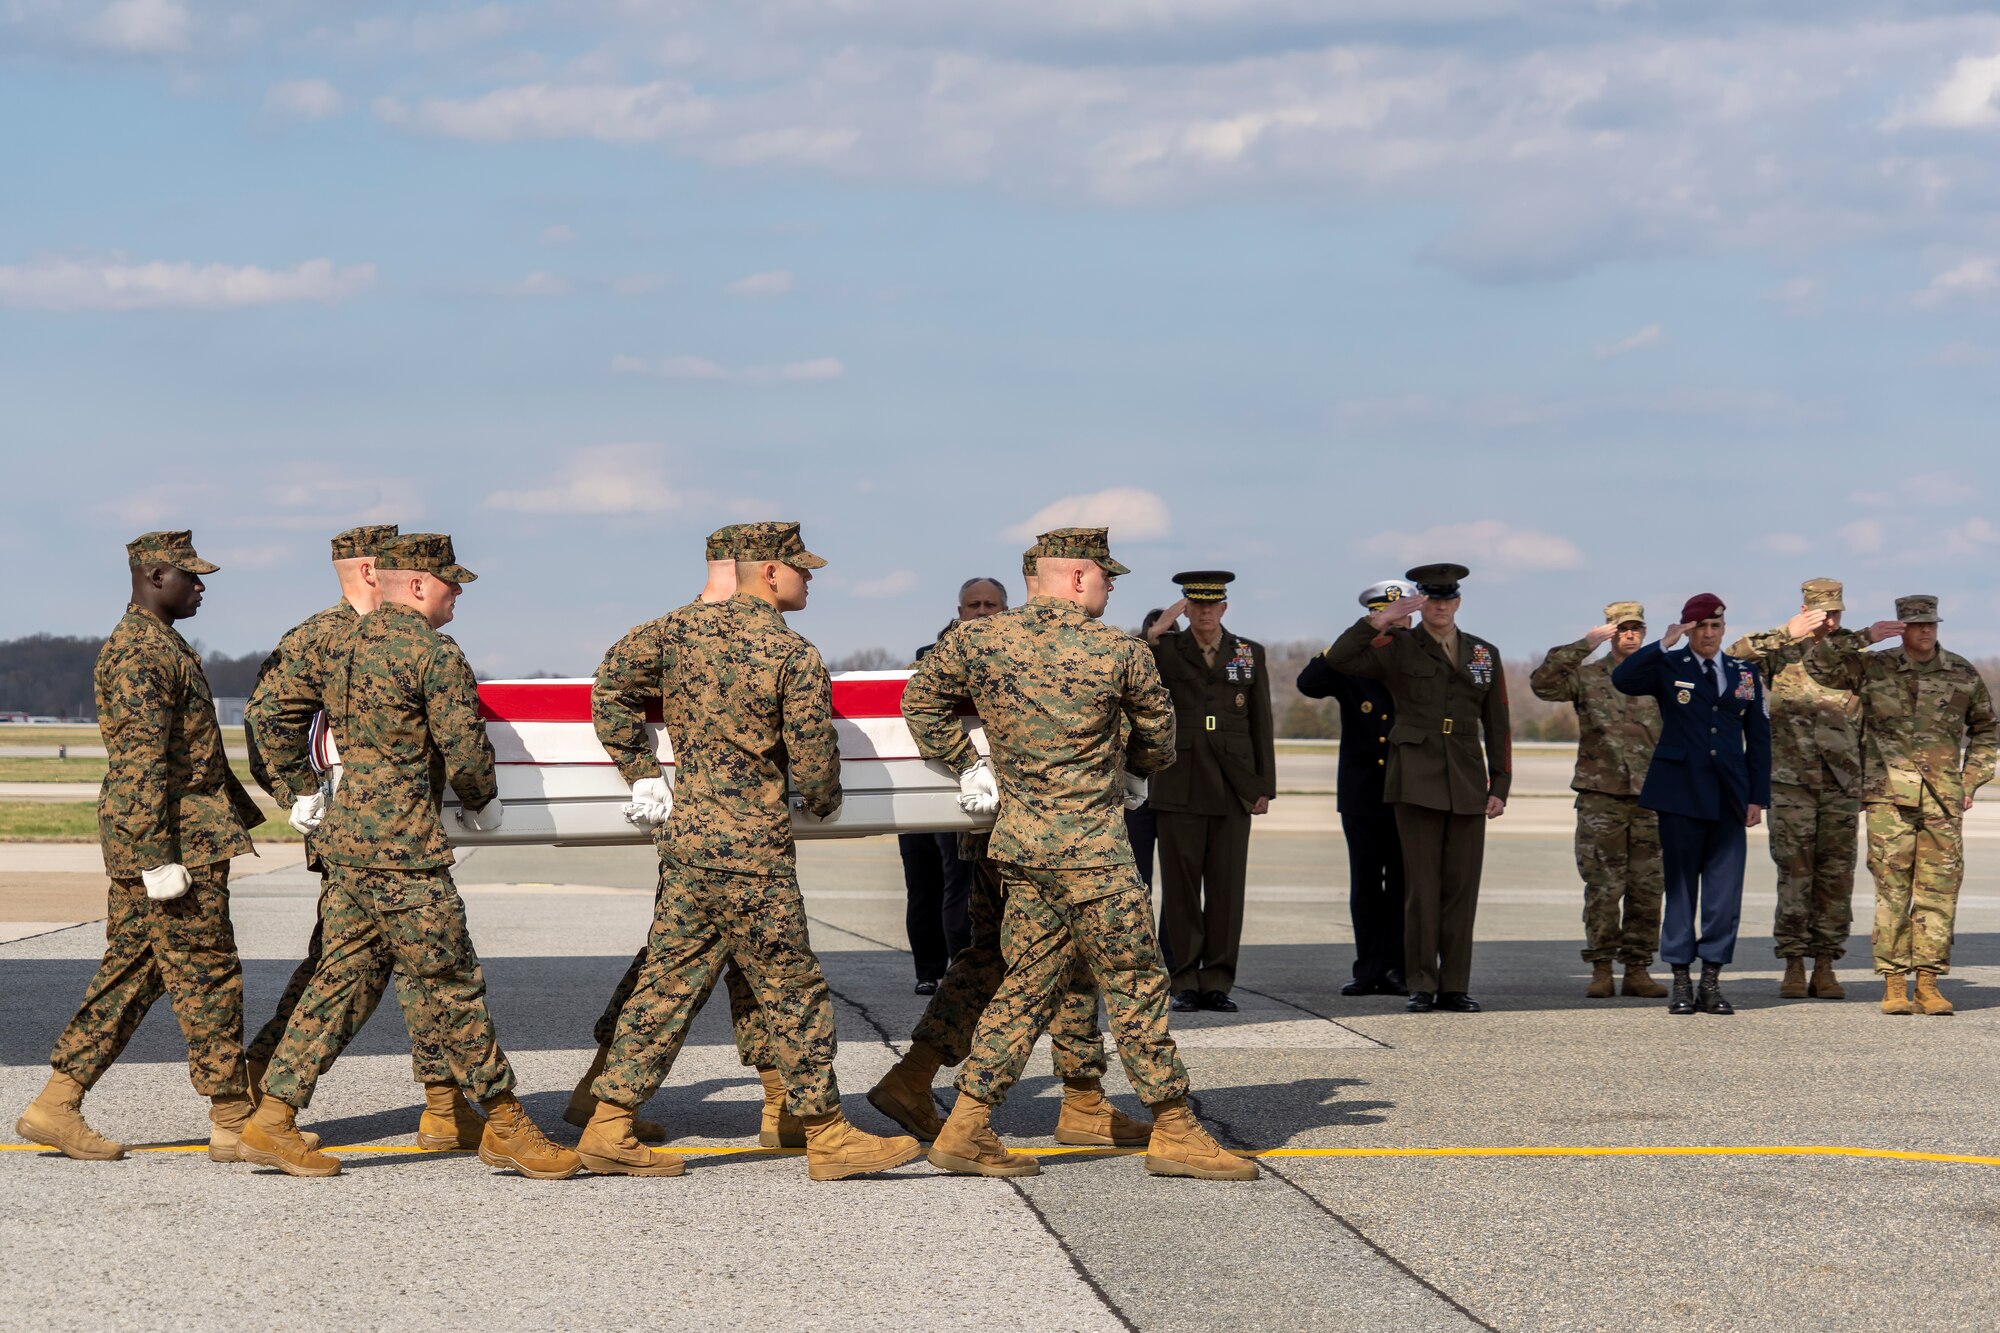 A U.S. Marine Corps carry team transfers the remains of Marine Corps Gunnery Sgt. James W. Speedy of Cambridge, Ohio, at Dover Air Force Base, Delaware, March 25, 2022. Speedy was assigned to Marine Medium Tiltrotor Squadron 261, Marine Aircraft Group 26, 2nd Marine Aircraft Wing, Marine Corps Air Station New River, North Carolina. (U.S. Air Force photo by Jason Minto)